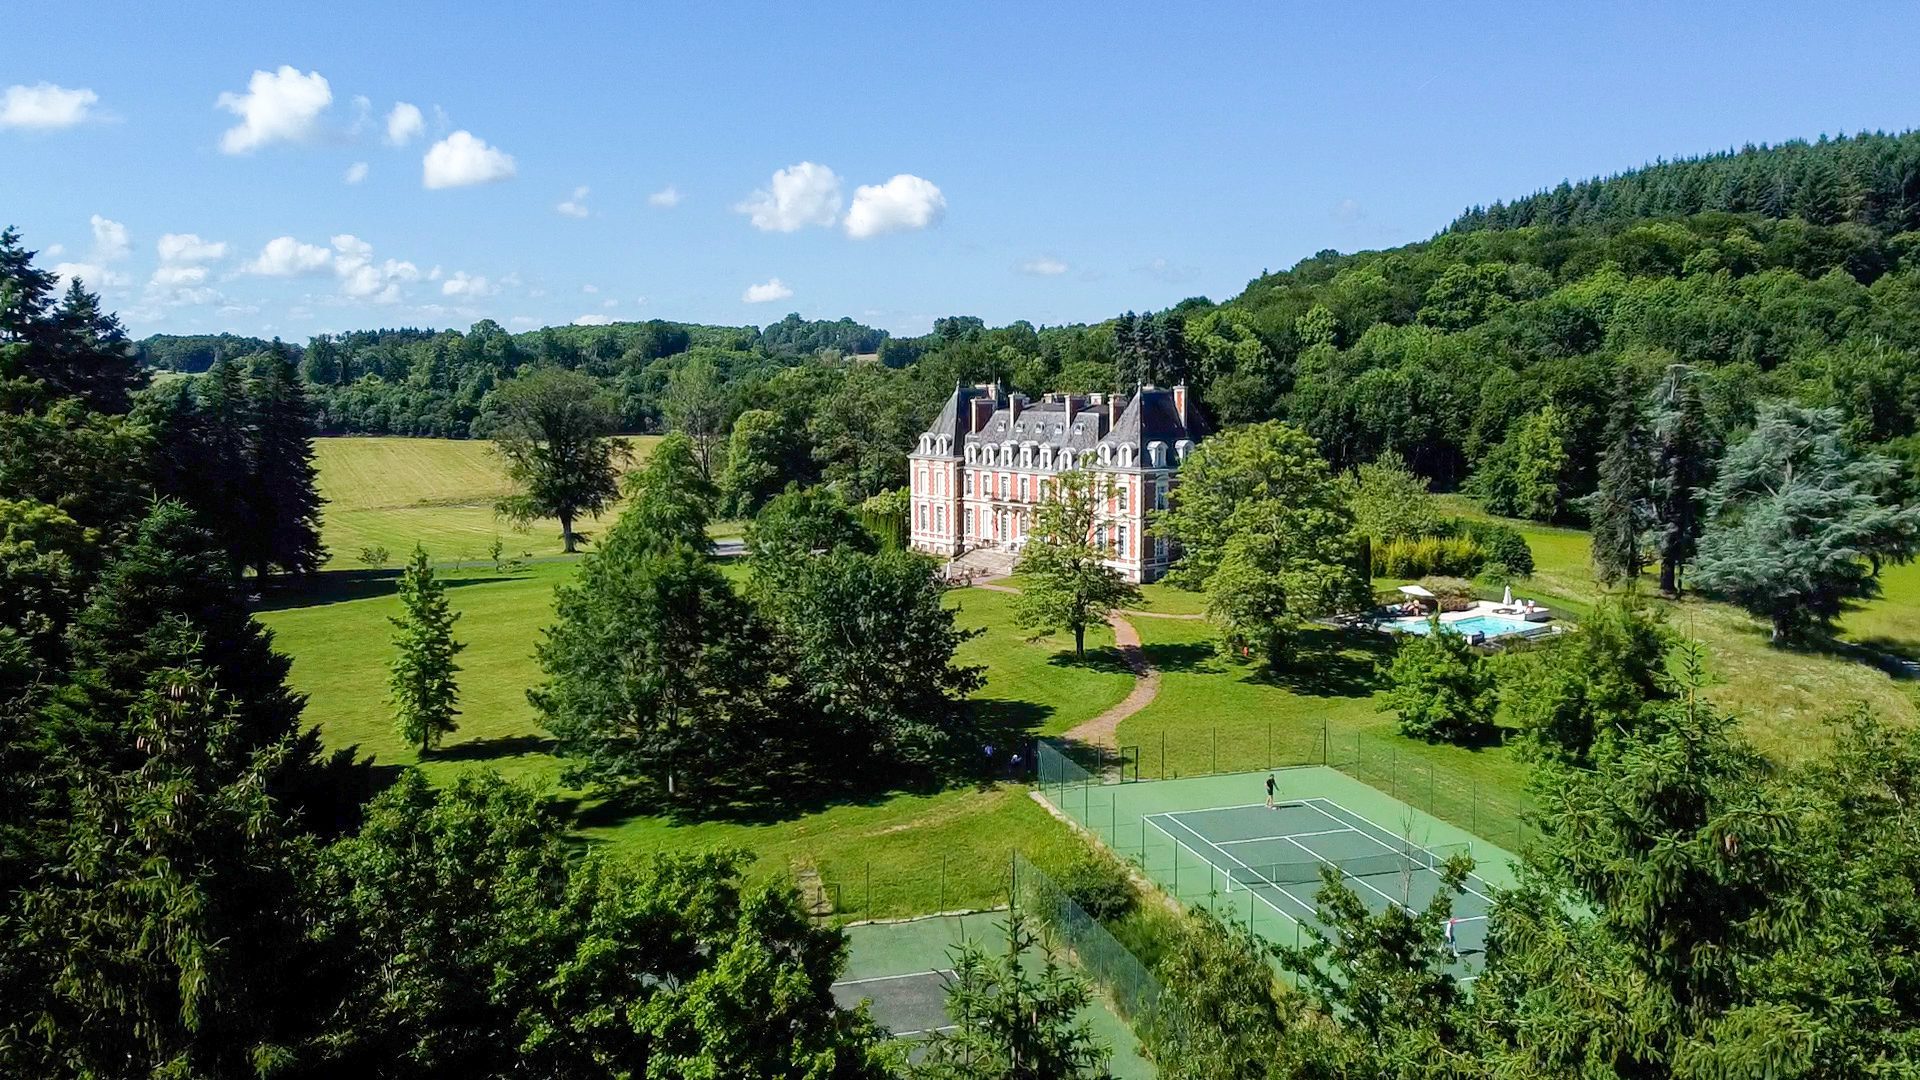 Aerial View of the Chateau de la Cazine, Grounds, French Countryside and Tennis Courts